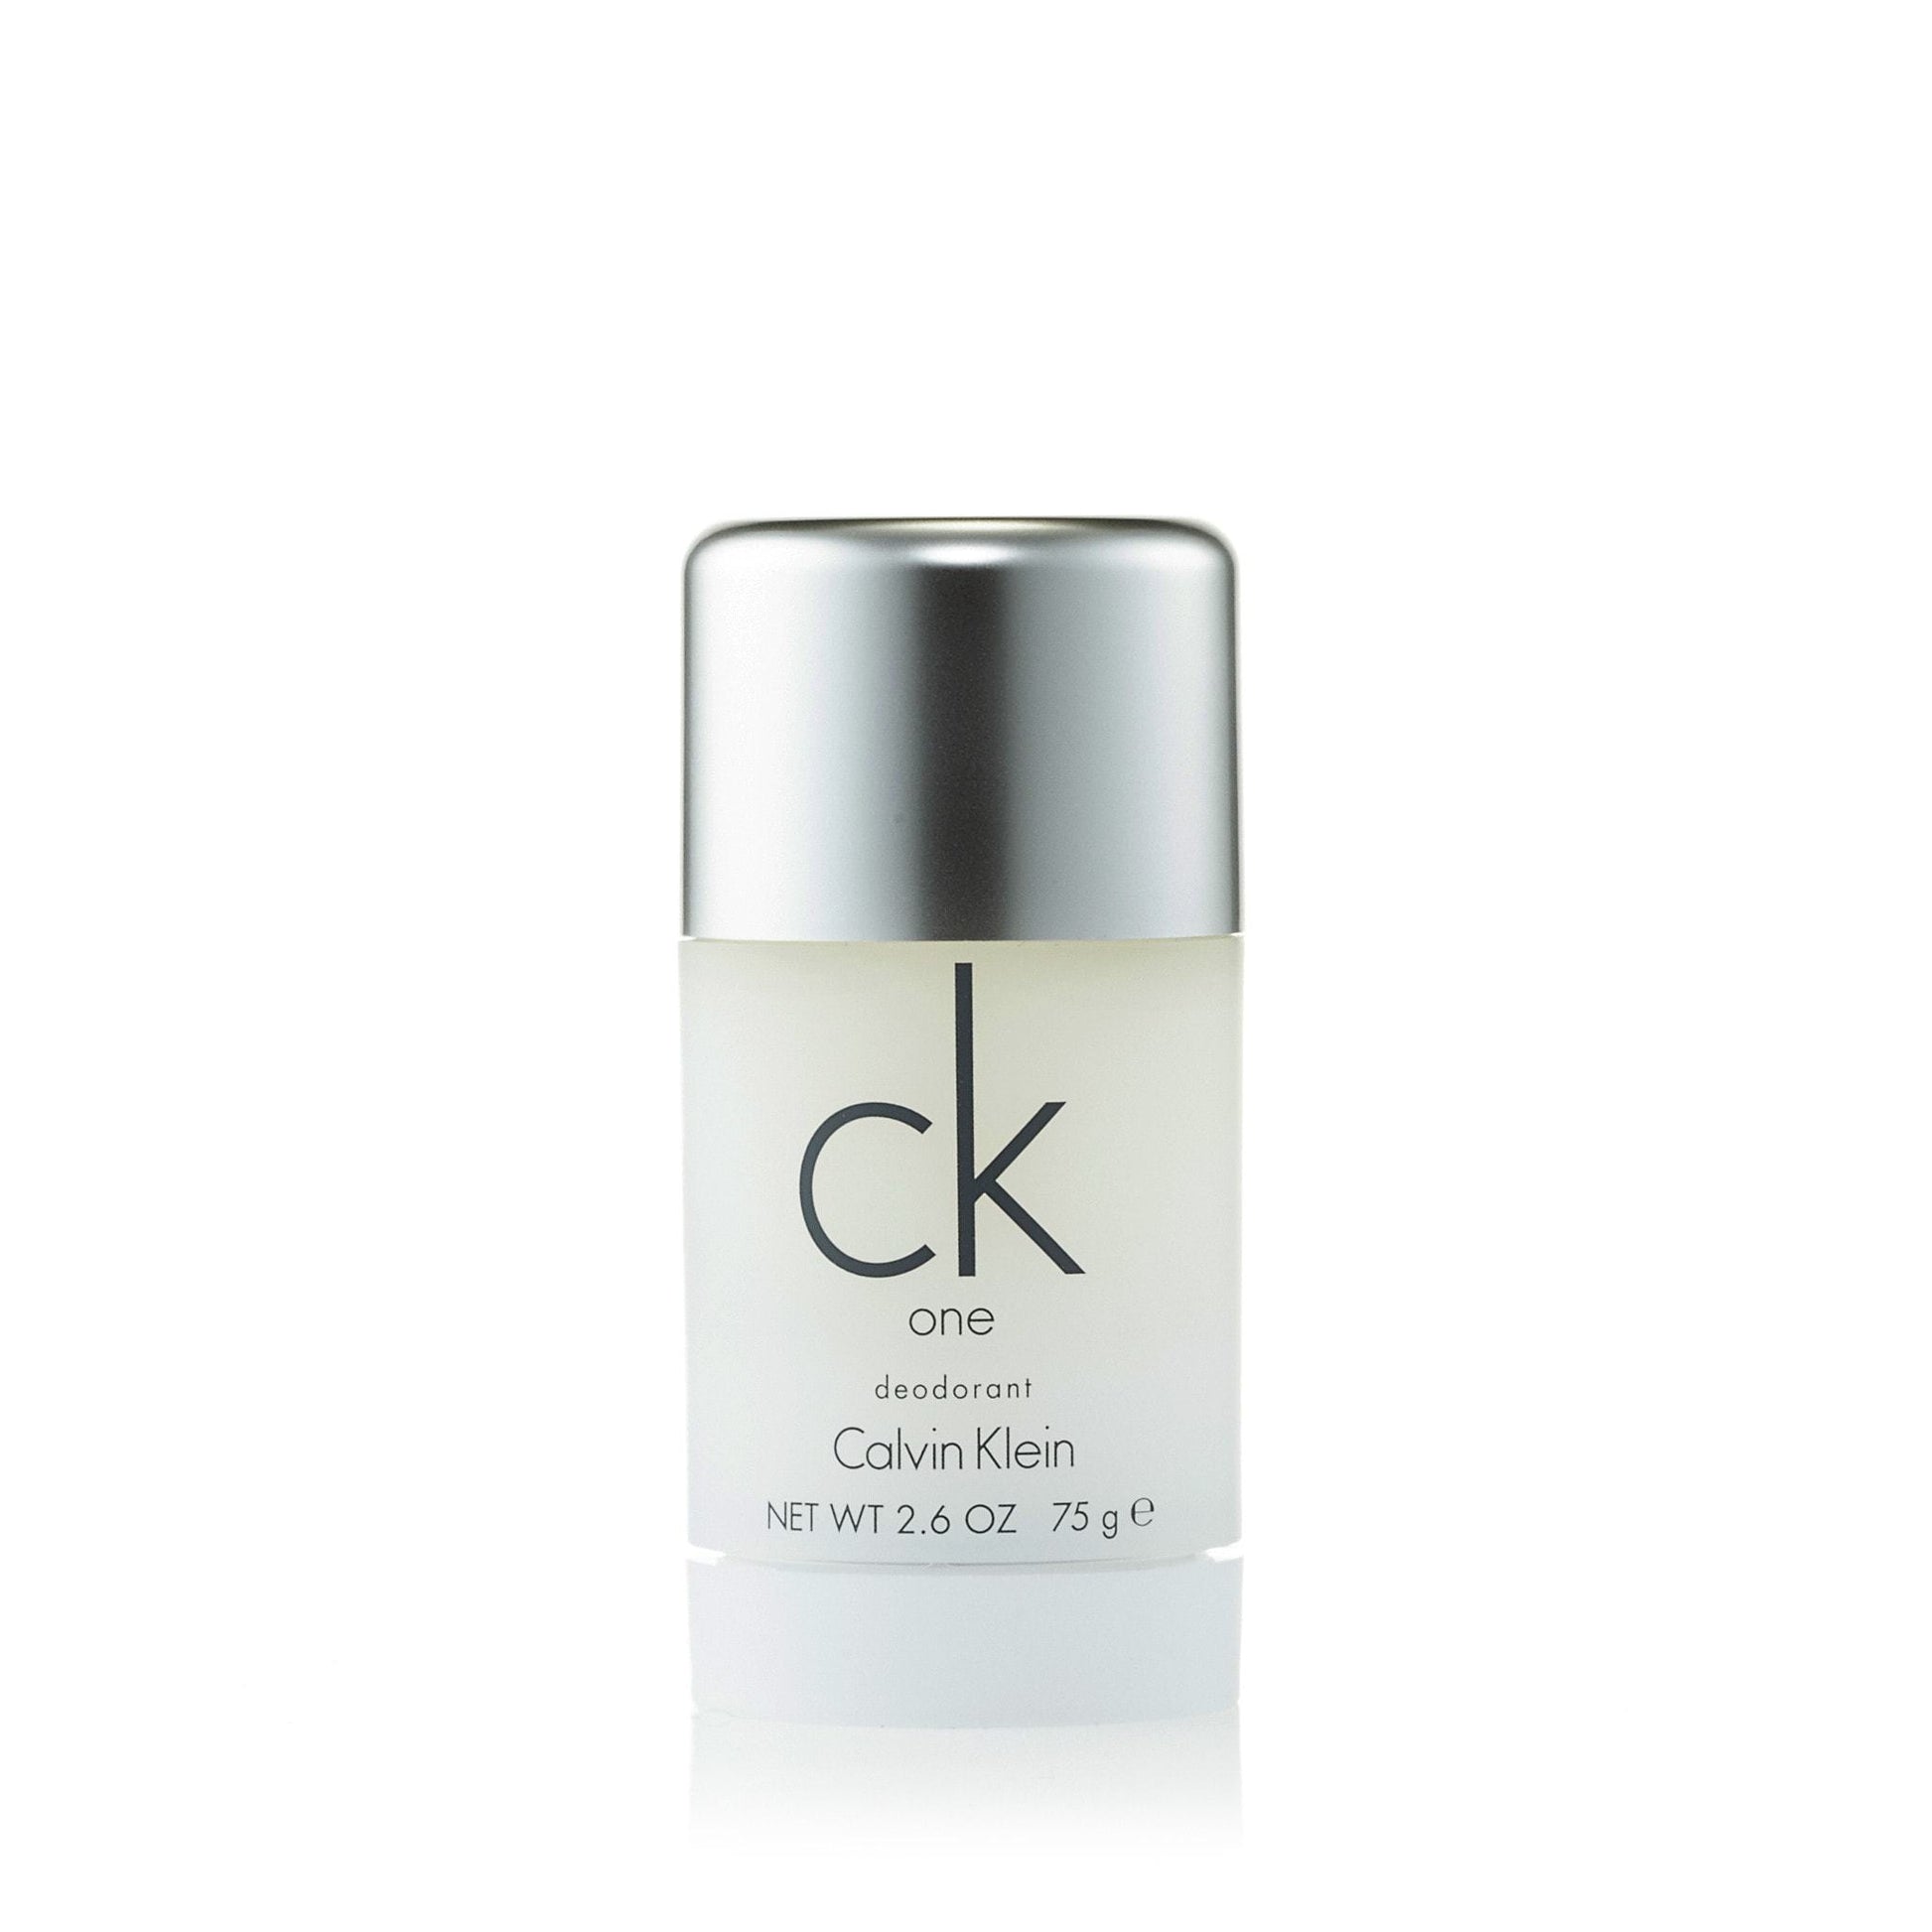 CK One Deodorant for Women and Men by Calvin Klein, Product image 1